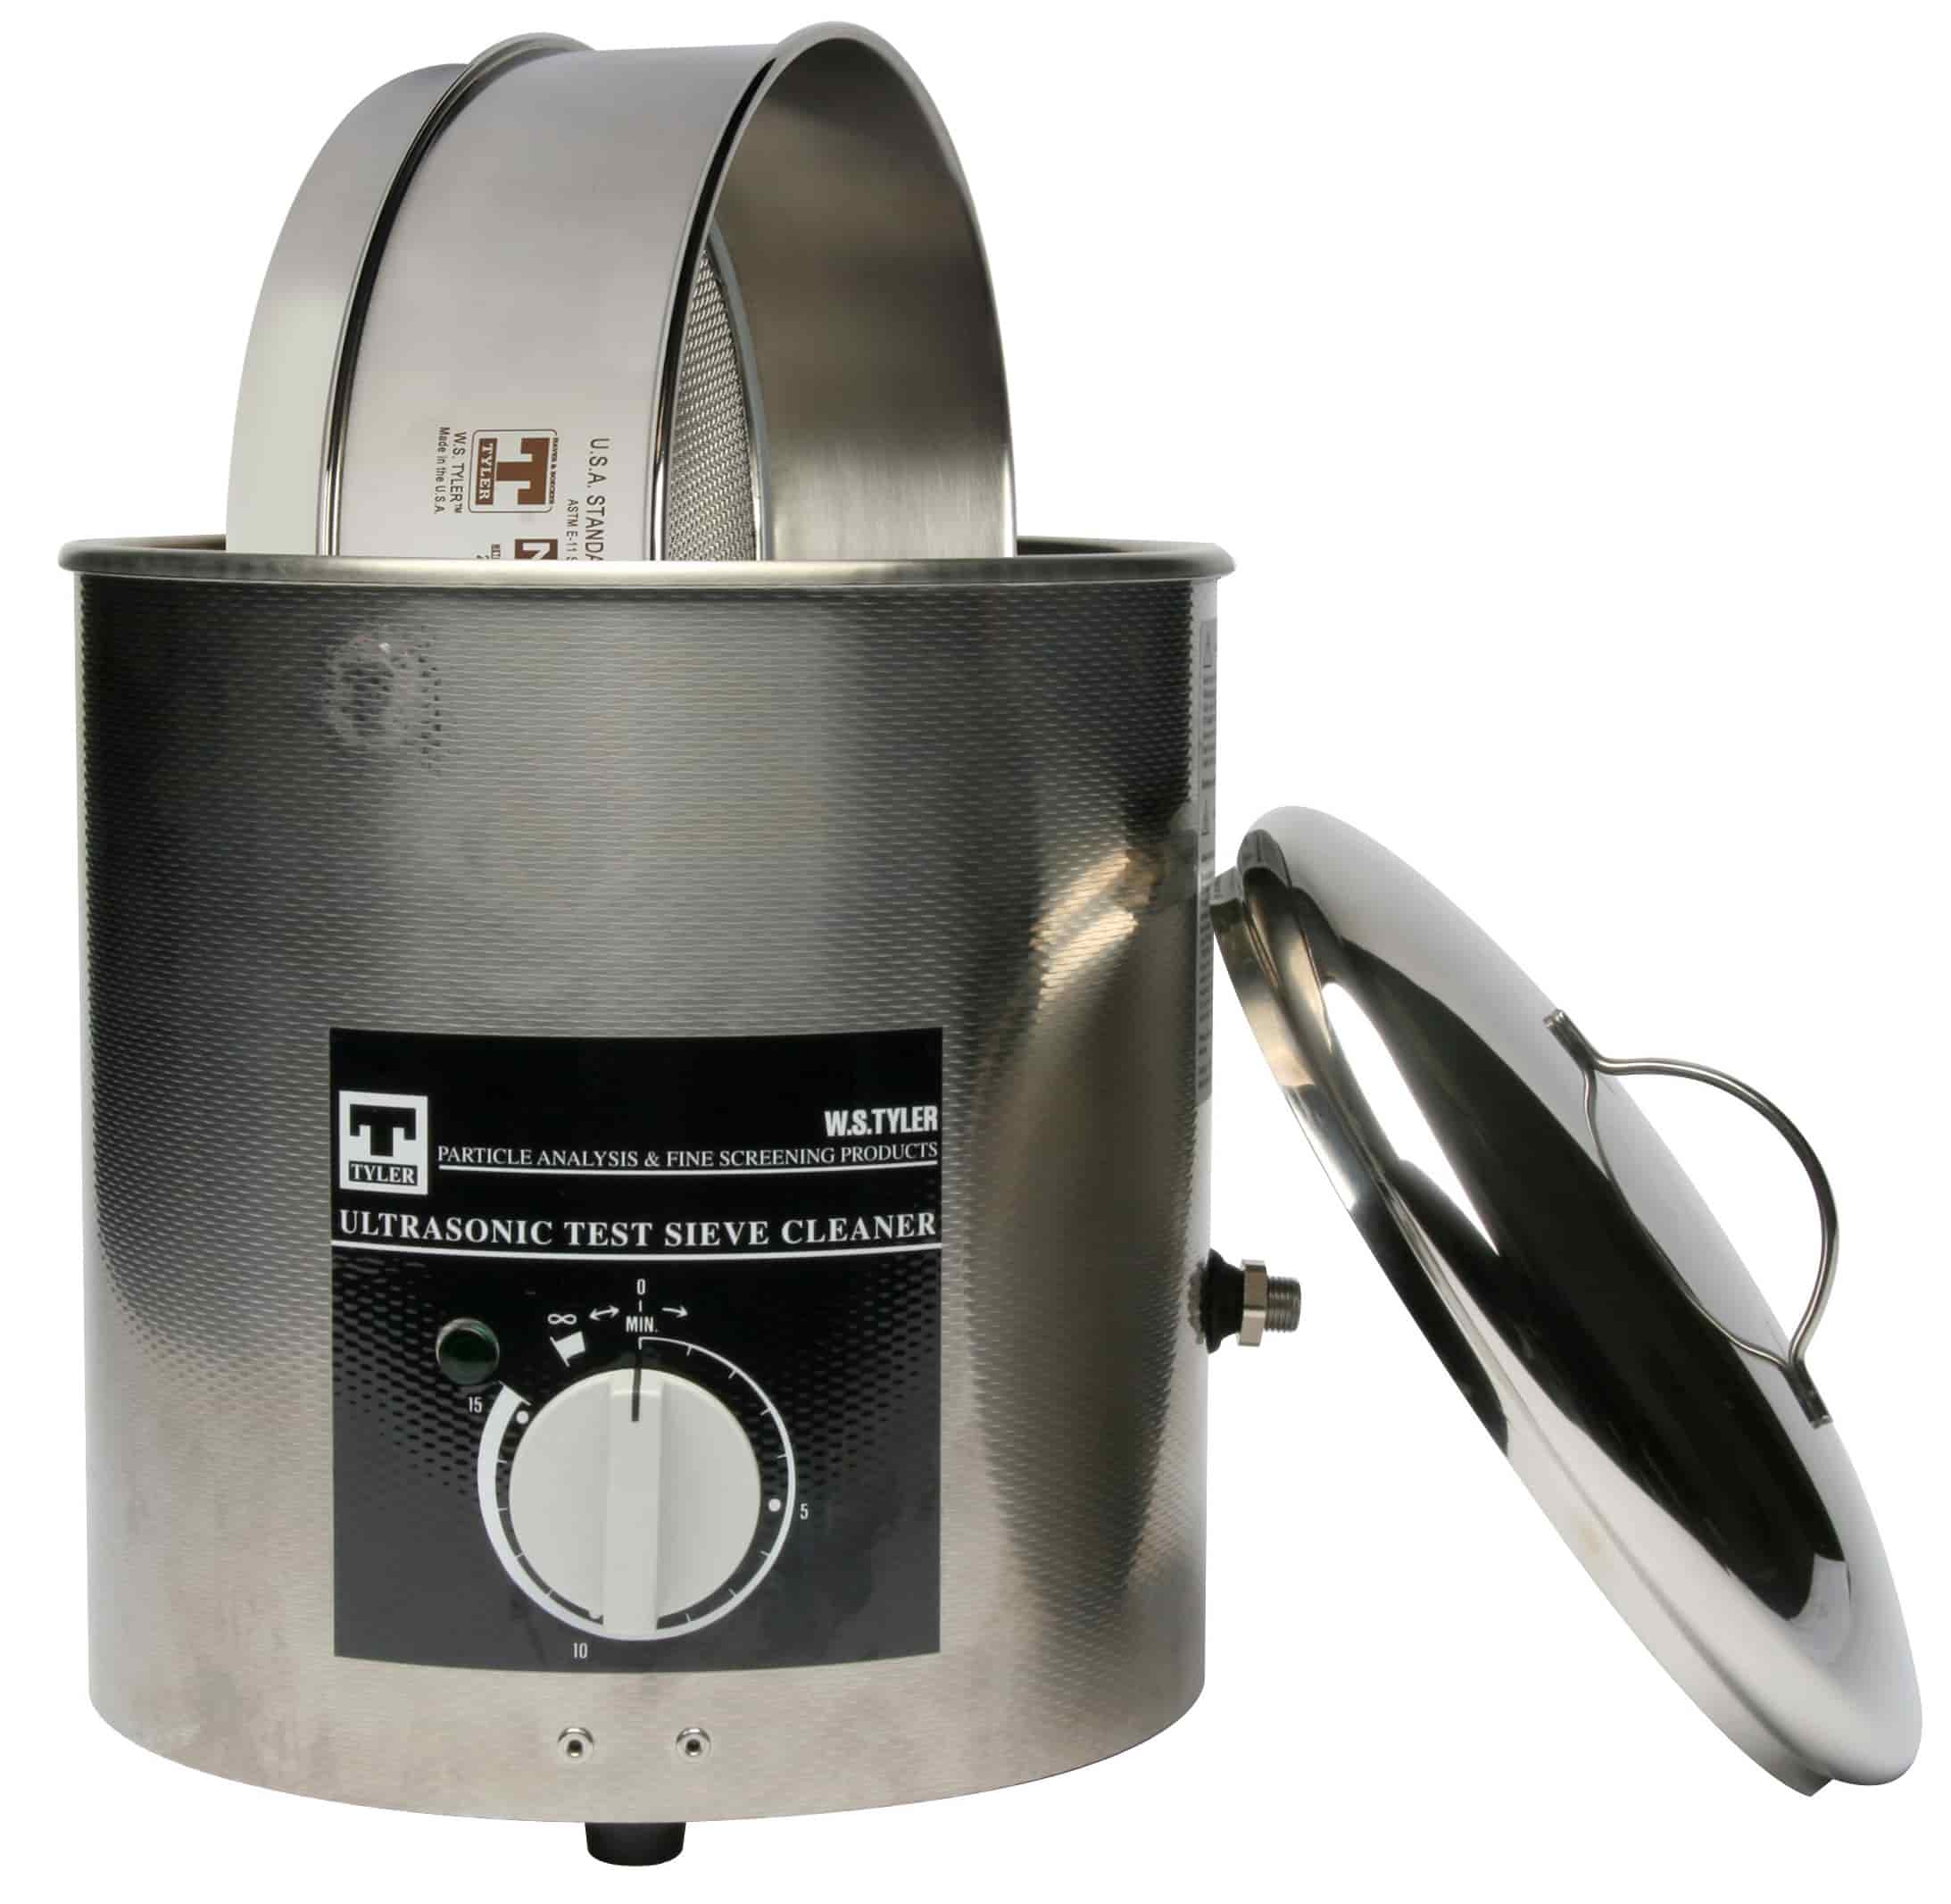 What Is an Ultrasonic Sieve Cleaner? (Definition, Cost, and Upkeep)